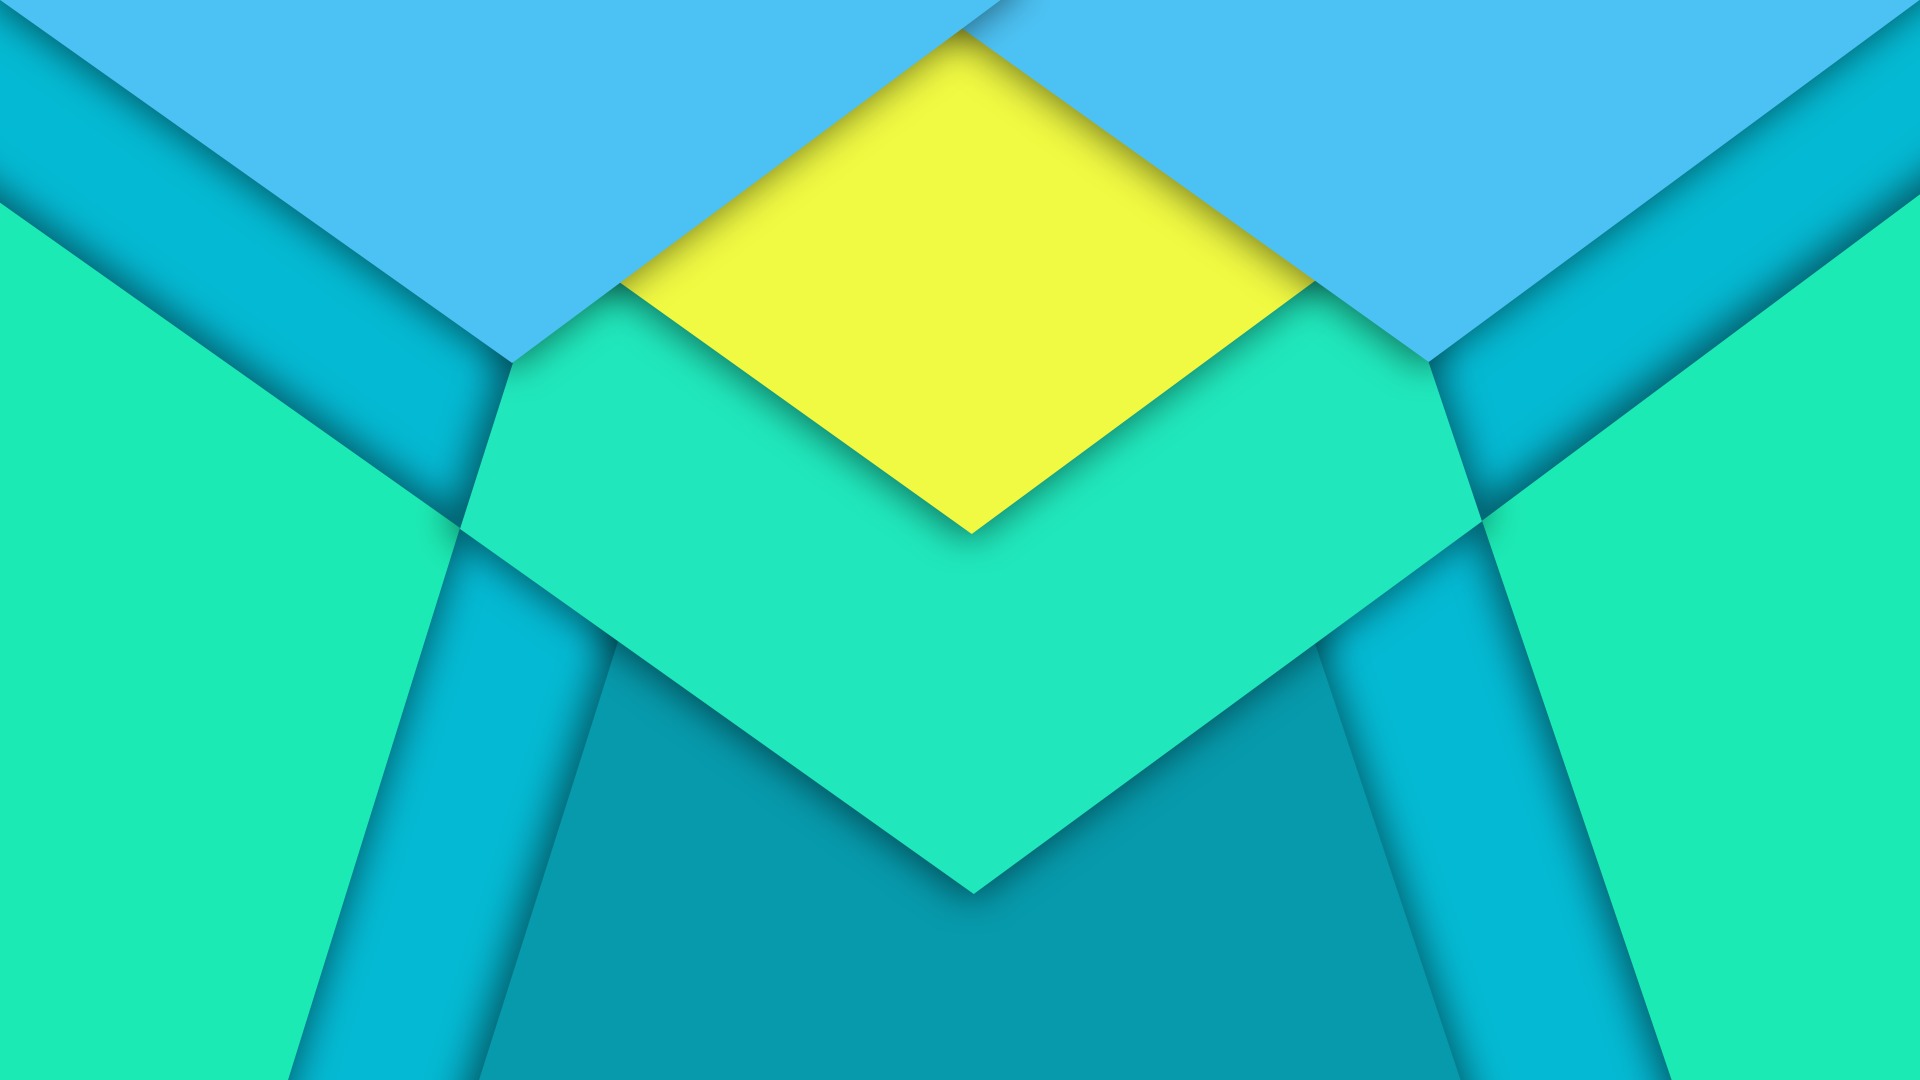 Blue And Green Material Design - HD Wallpaper 